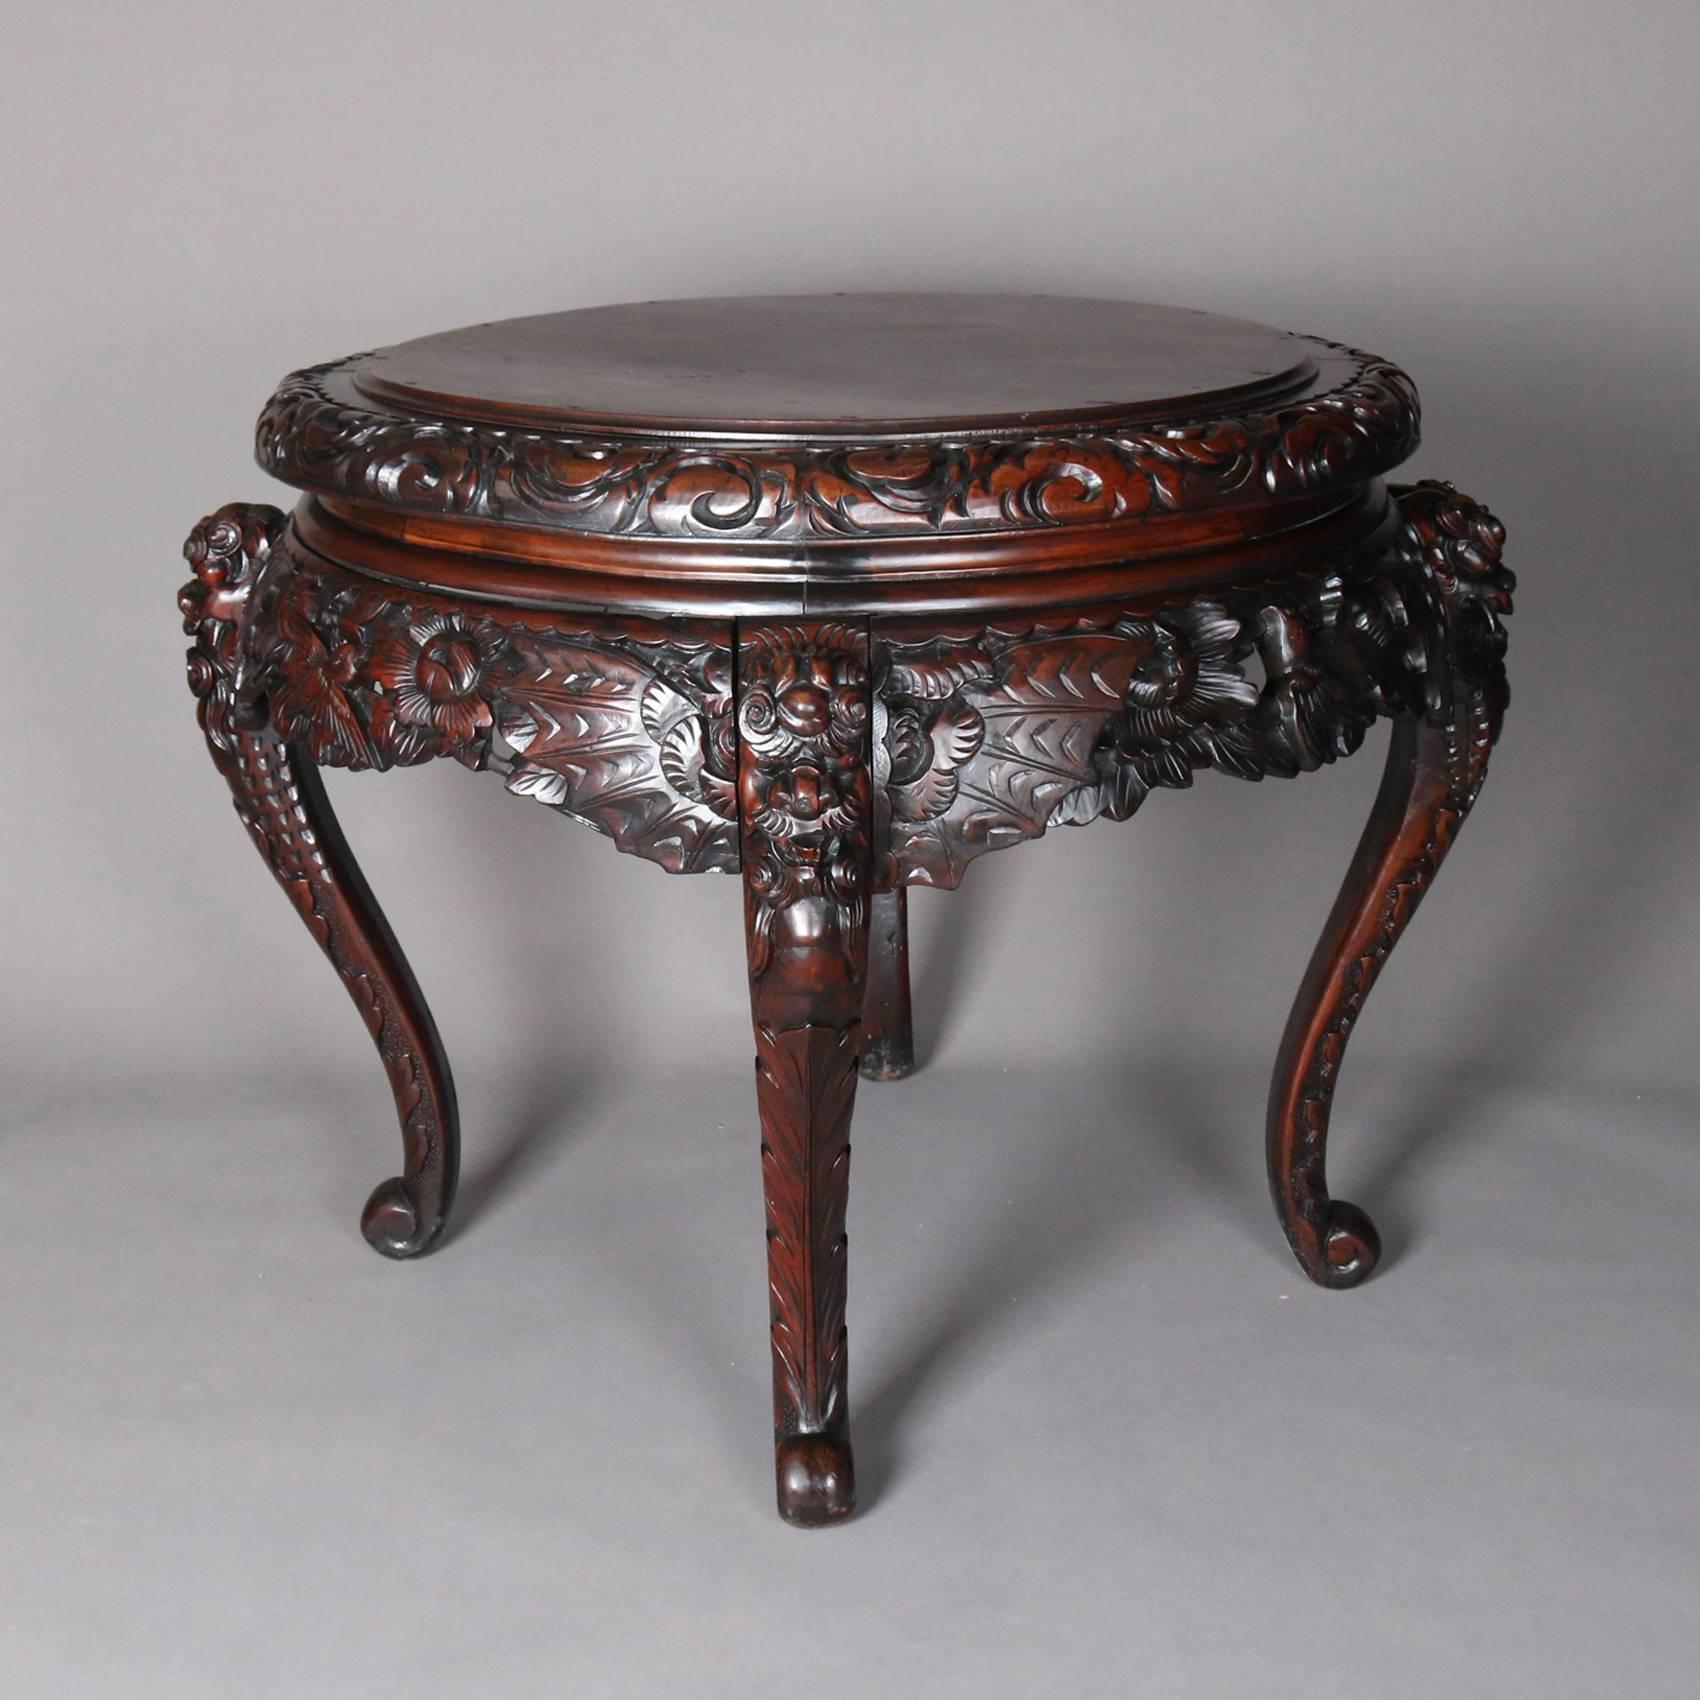 Antique Japanese carved hardwood figural centre table features carved and pierced apron, floral and foliate with birds, and figural legs, 19th century.

Measures: 33" height x 38" diameter.